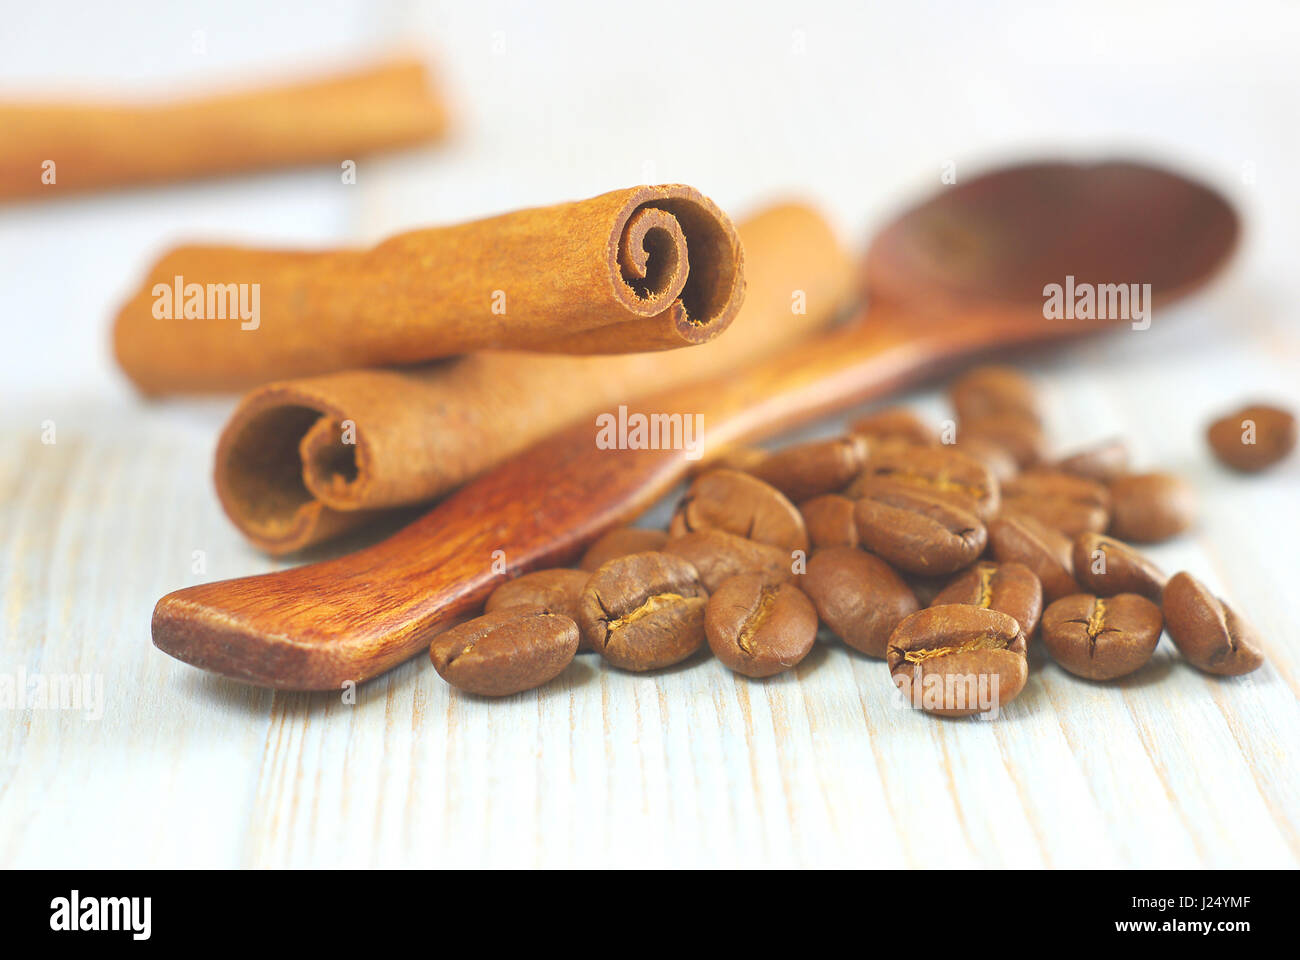 Coffee grains with wooden old-style spoon and cinnamon sticks on vintage table food ingredients background. Selective focus. Coffee aroma drink ingred Stock Photo